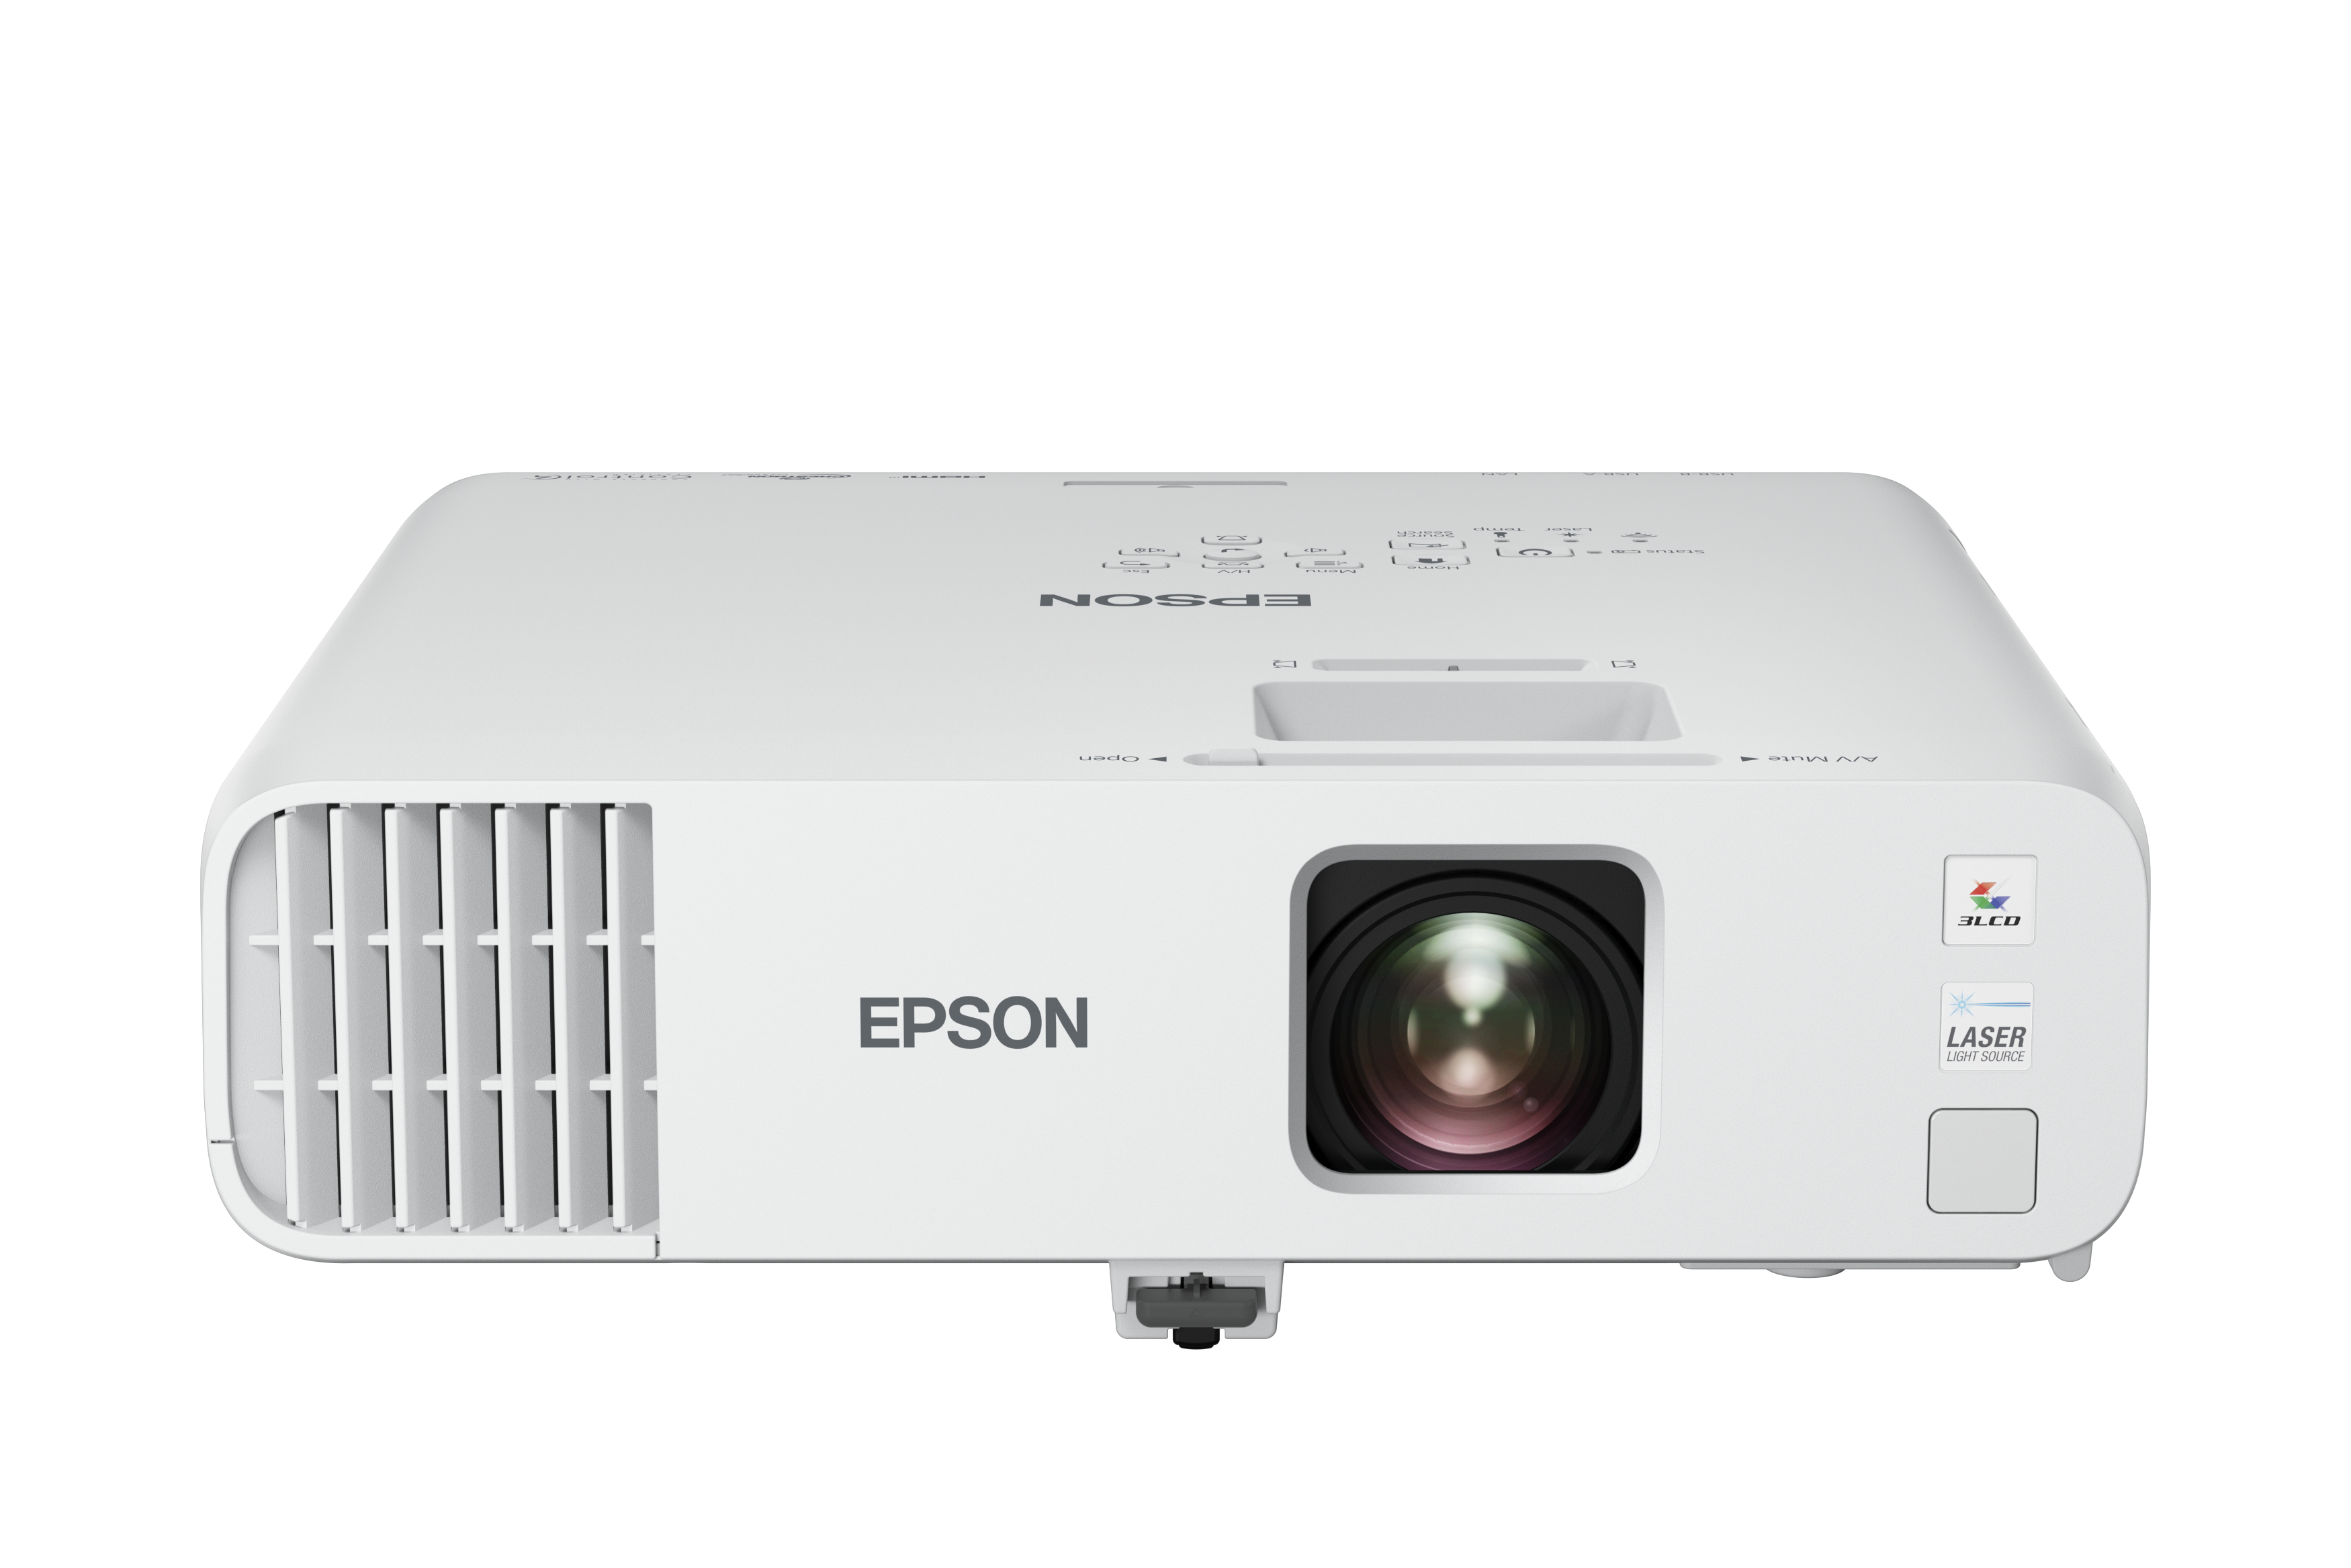 EB-L250F beamer/projector Projector met normale projectieafstand 4500 ANSI lumens 3LCD 1080p (1920x1080) Wit